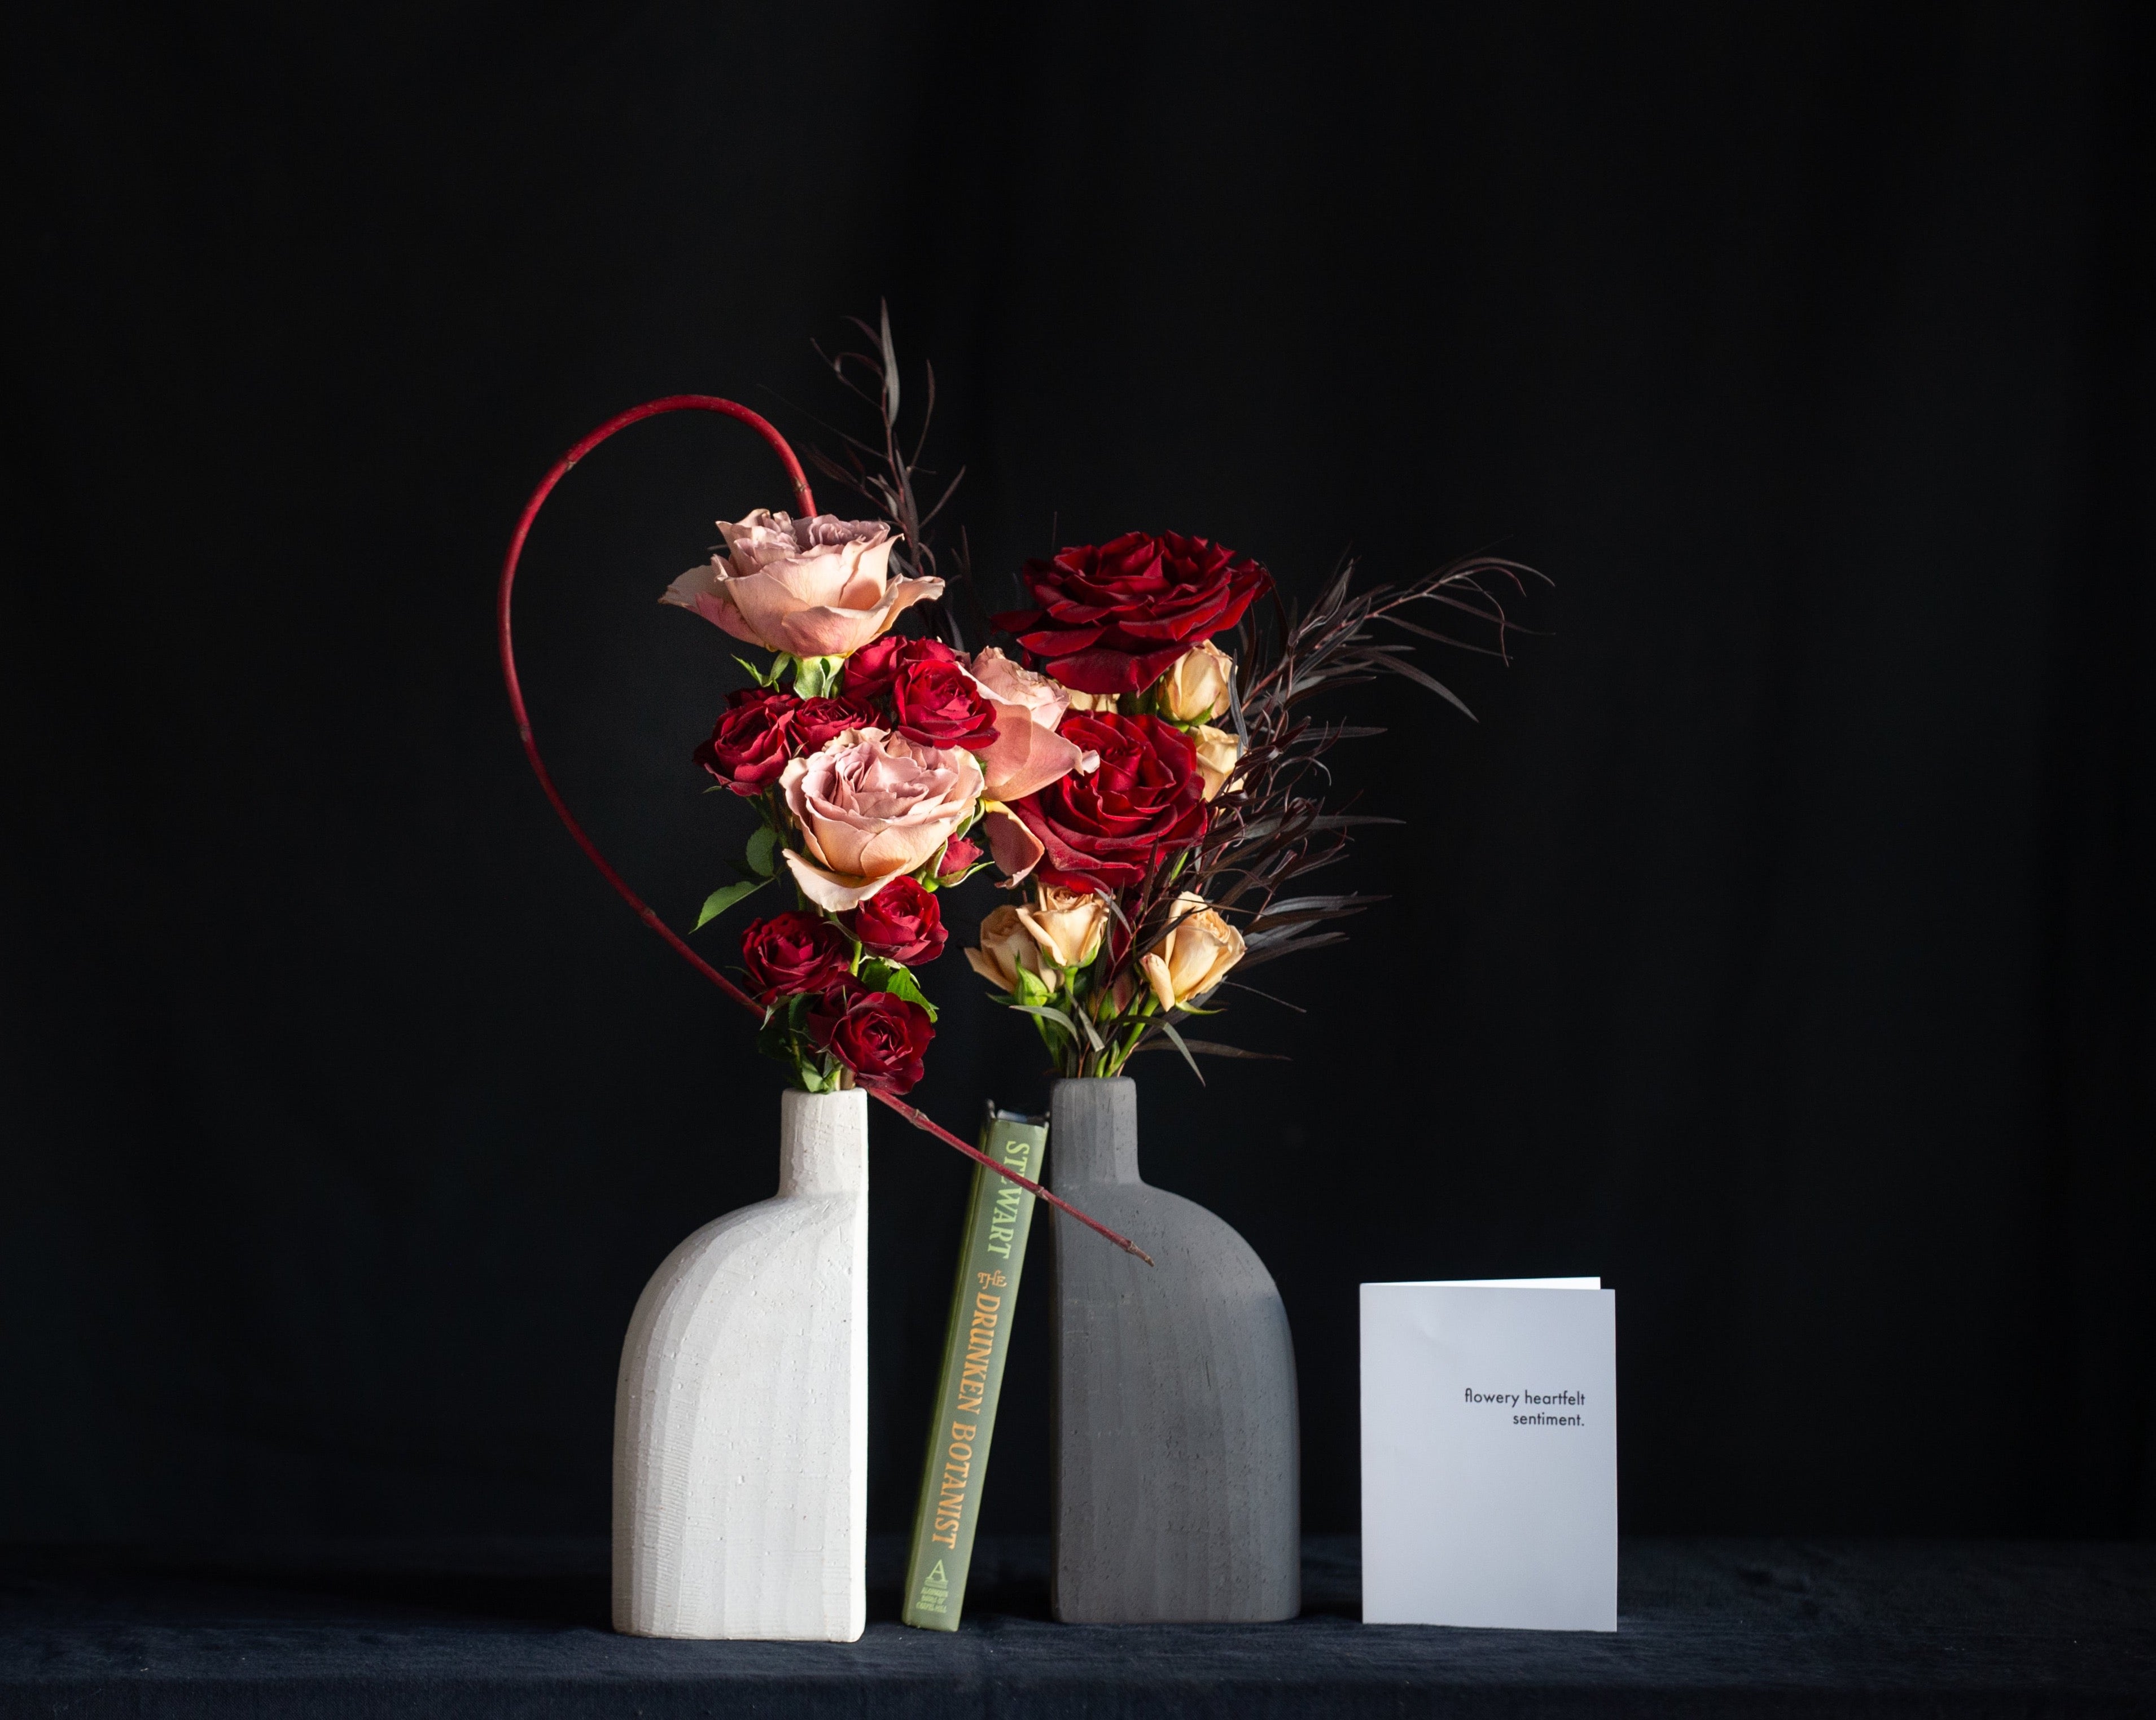 Bookend Bud Vases for your better half